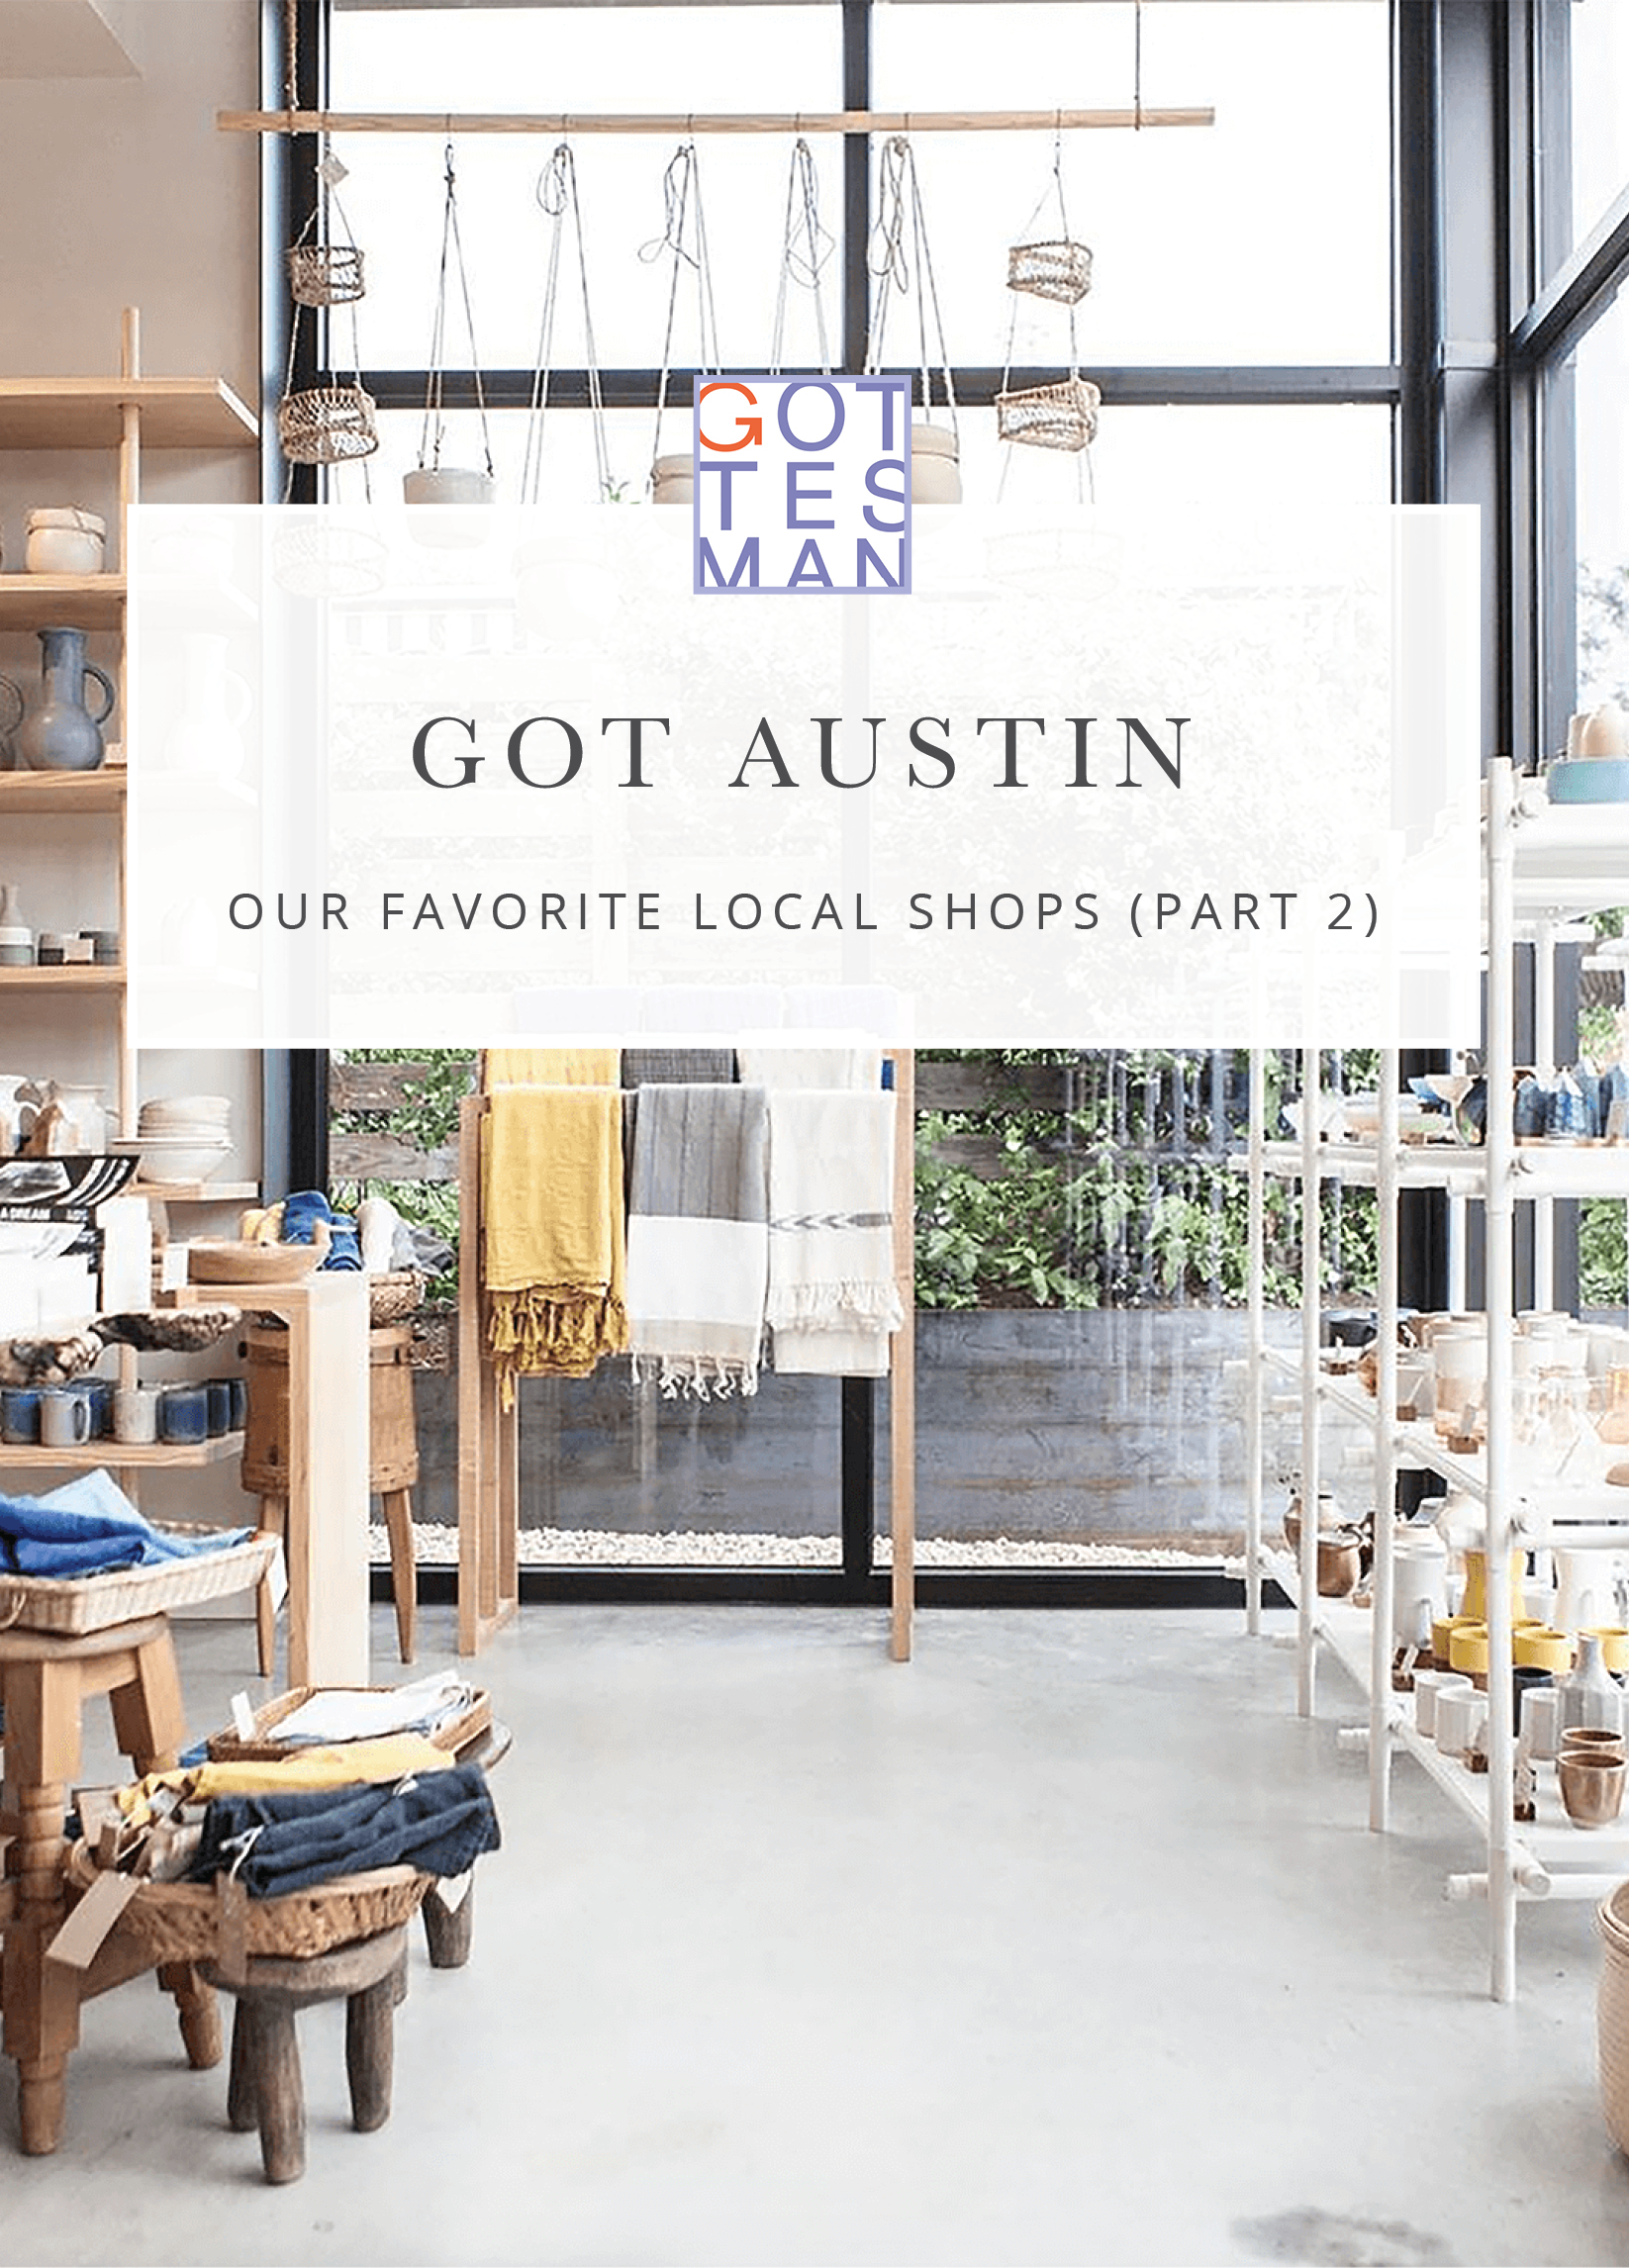 Store with text overlay, "Got Austin: Our Favorite Local Shops (Part 2)"